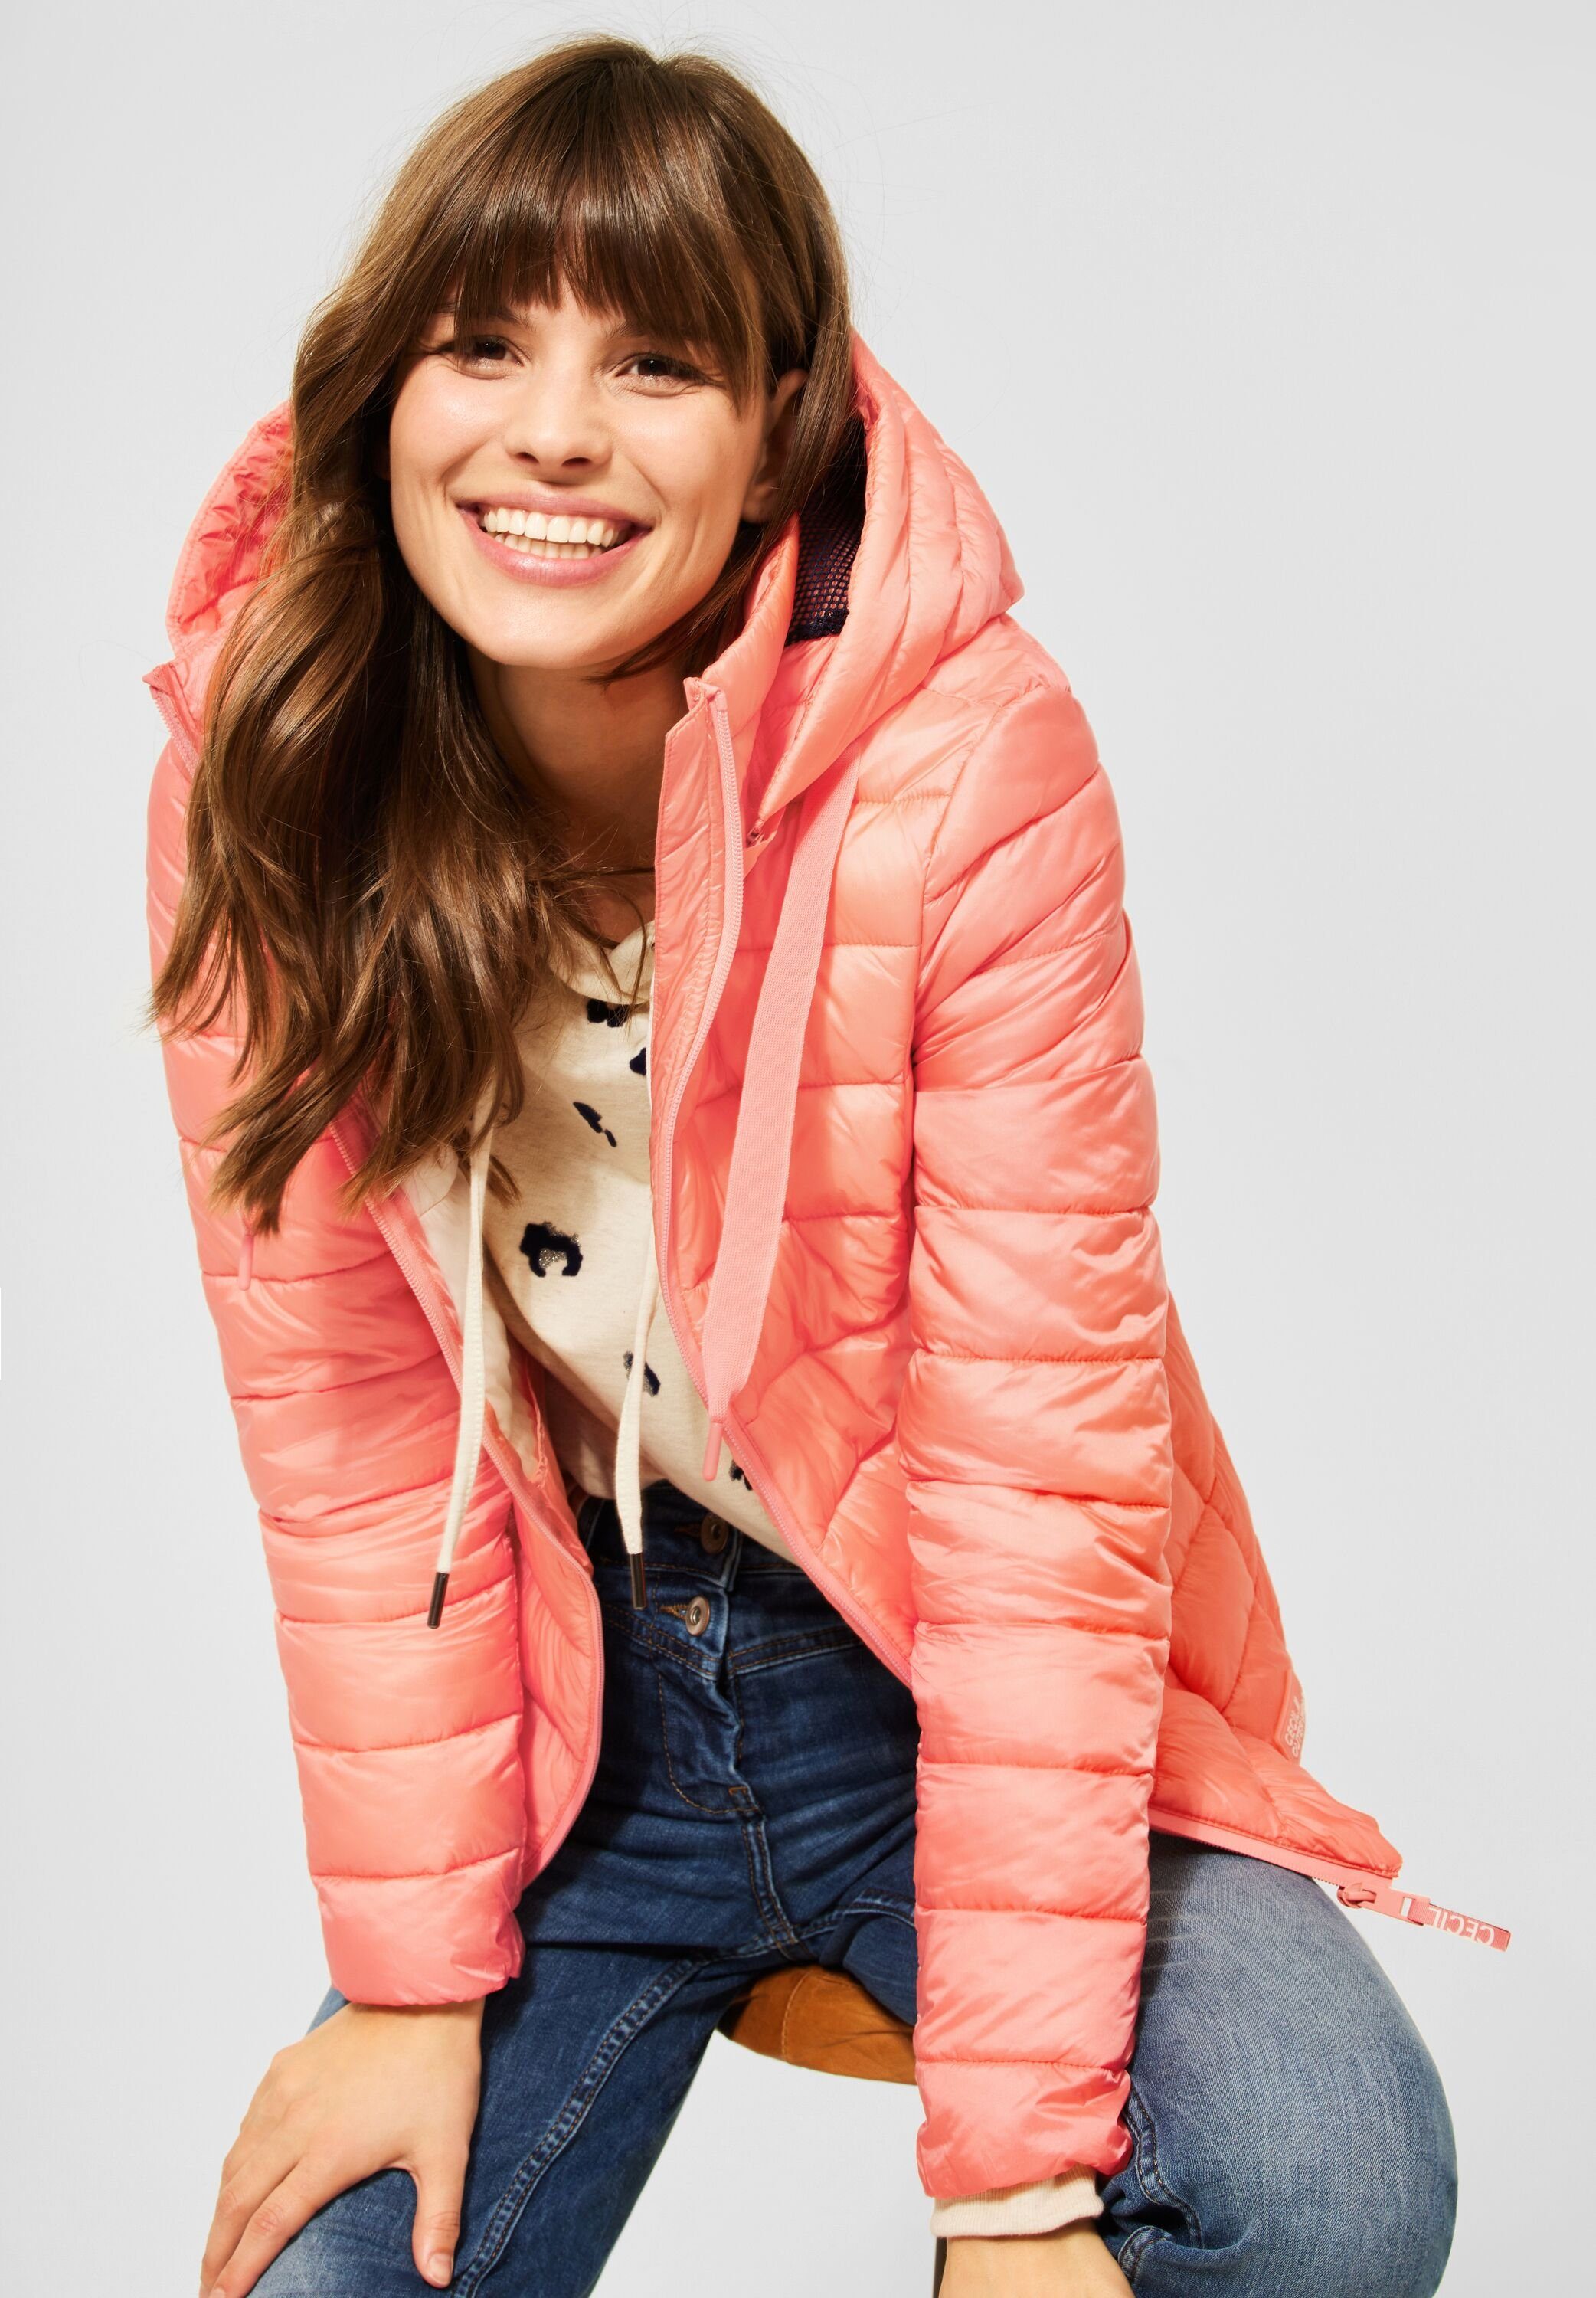 Cecil Outdoorjacke Cecil Gesteppte Outdoor Material: Taschen, in (1-St) Futter 100% Obermaterial 100% Futter Polyester Rose Jacke Grapefruit Nylon, 100% Nylon